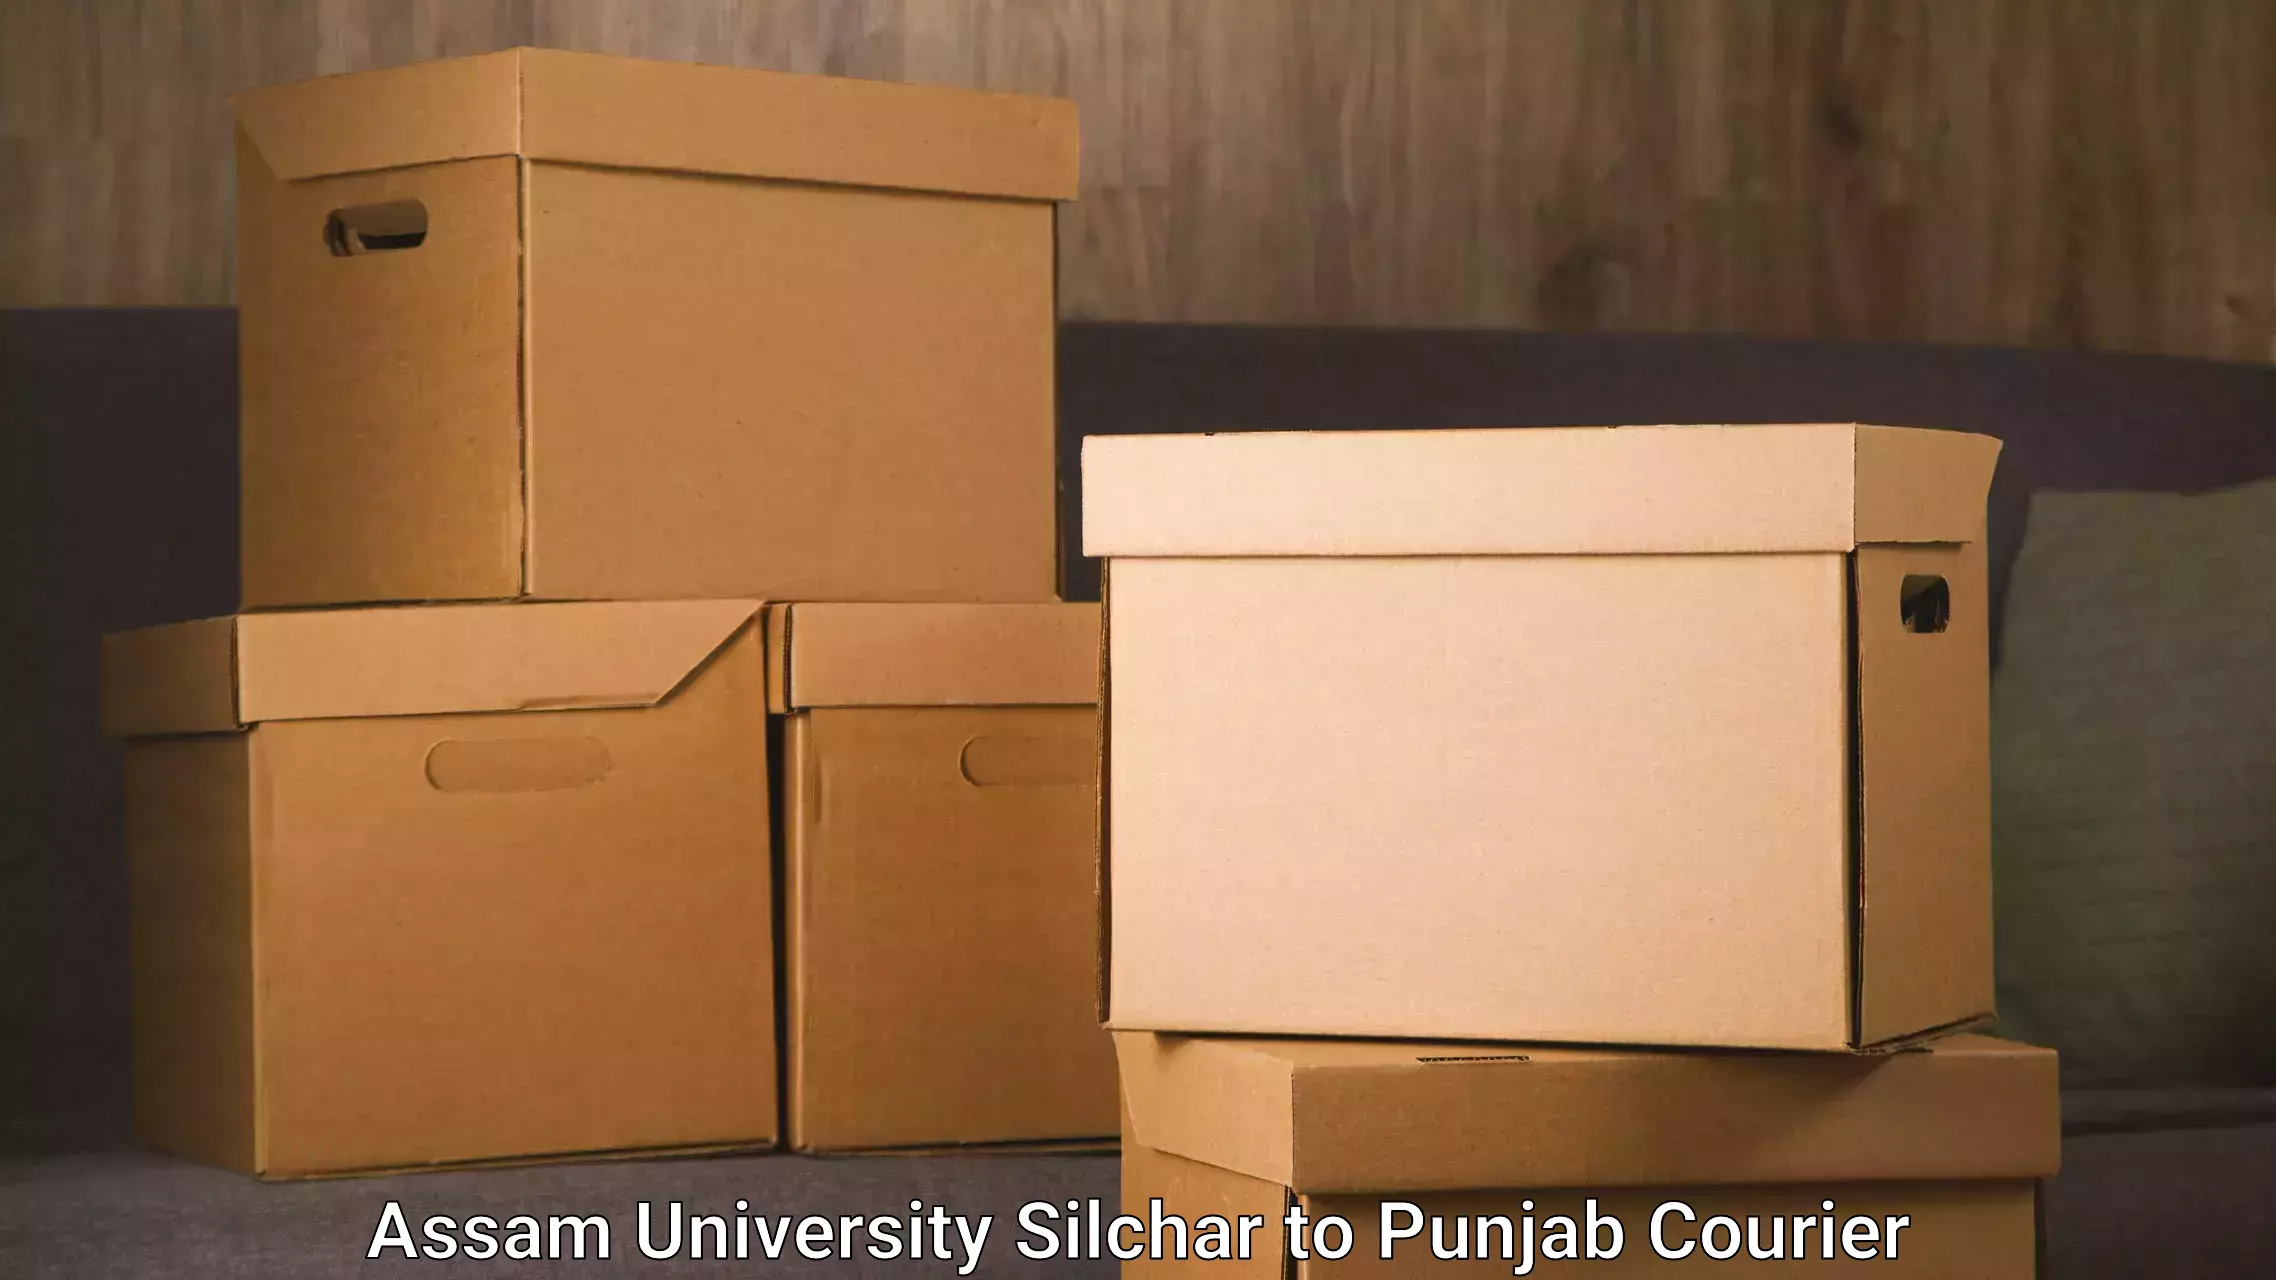 Secure package delivery Assam University Silchar to Patiala